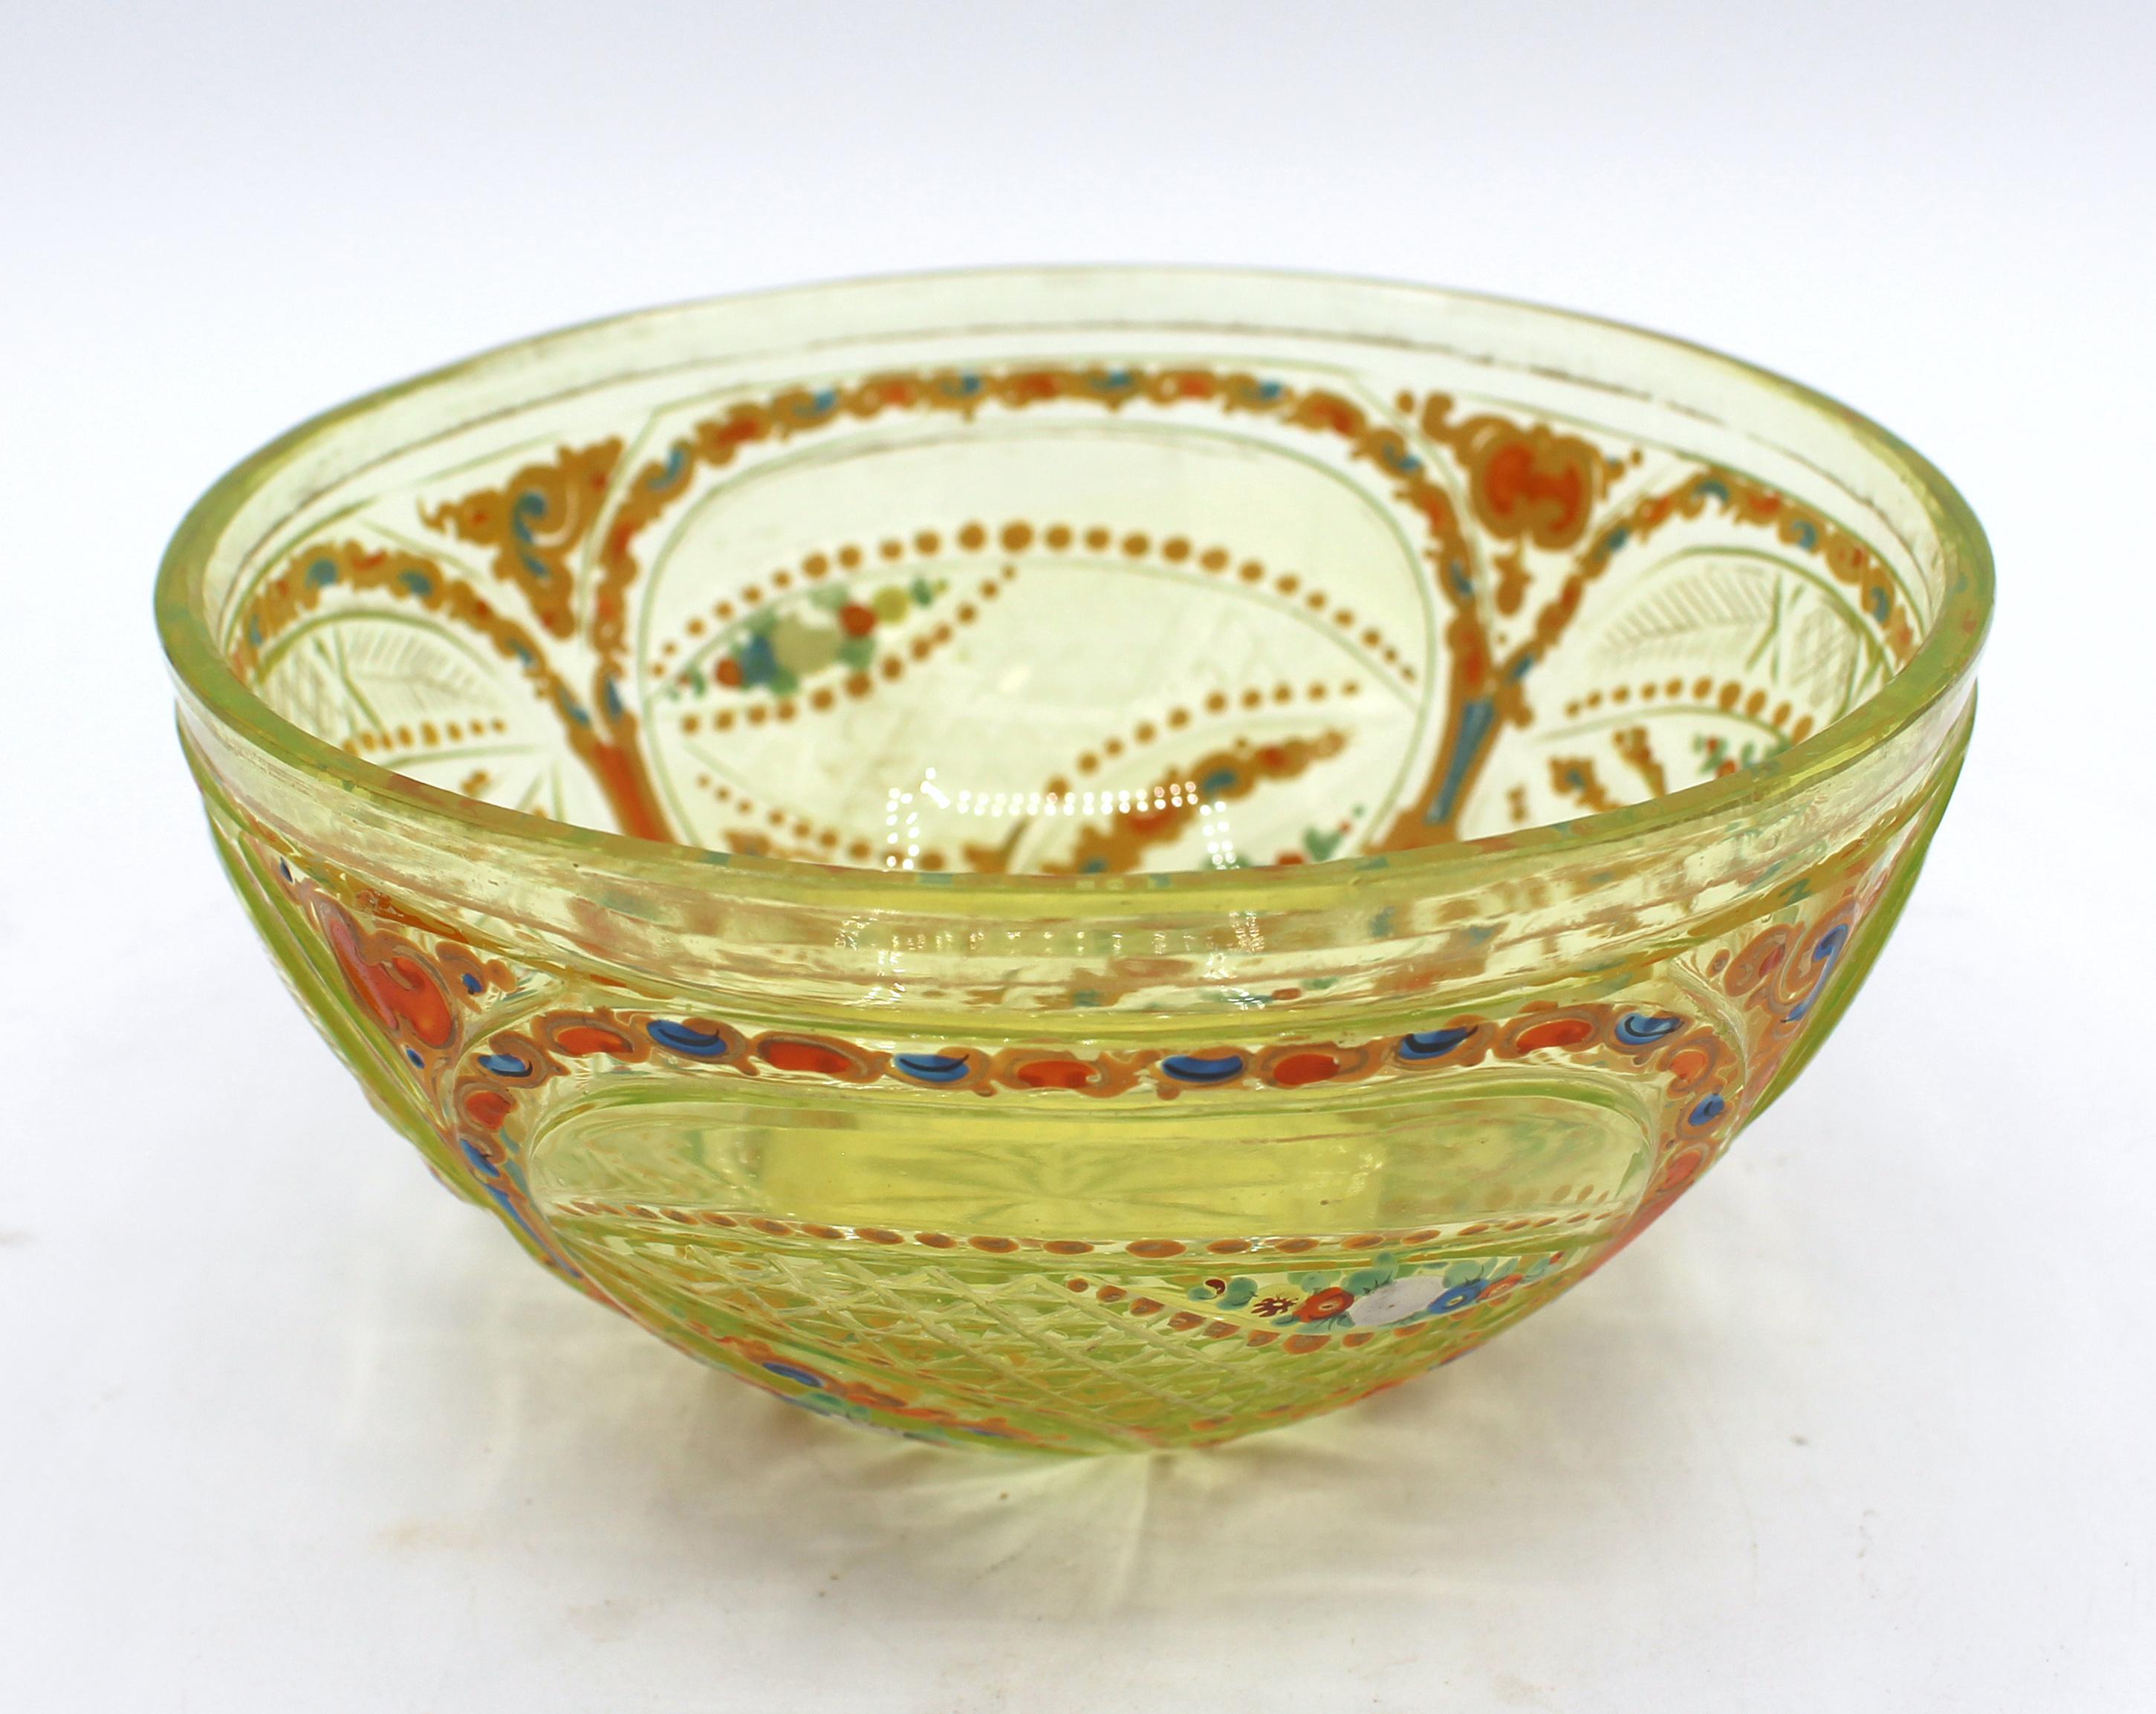 2nd half 19th century Bohemian vaseline glass  (also called Uraline or Ouraline glass) open sauce bowl. Blown & cut, then enameled & gilded. Gilt border rubbed. 5.5